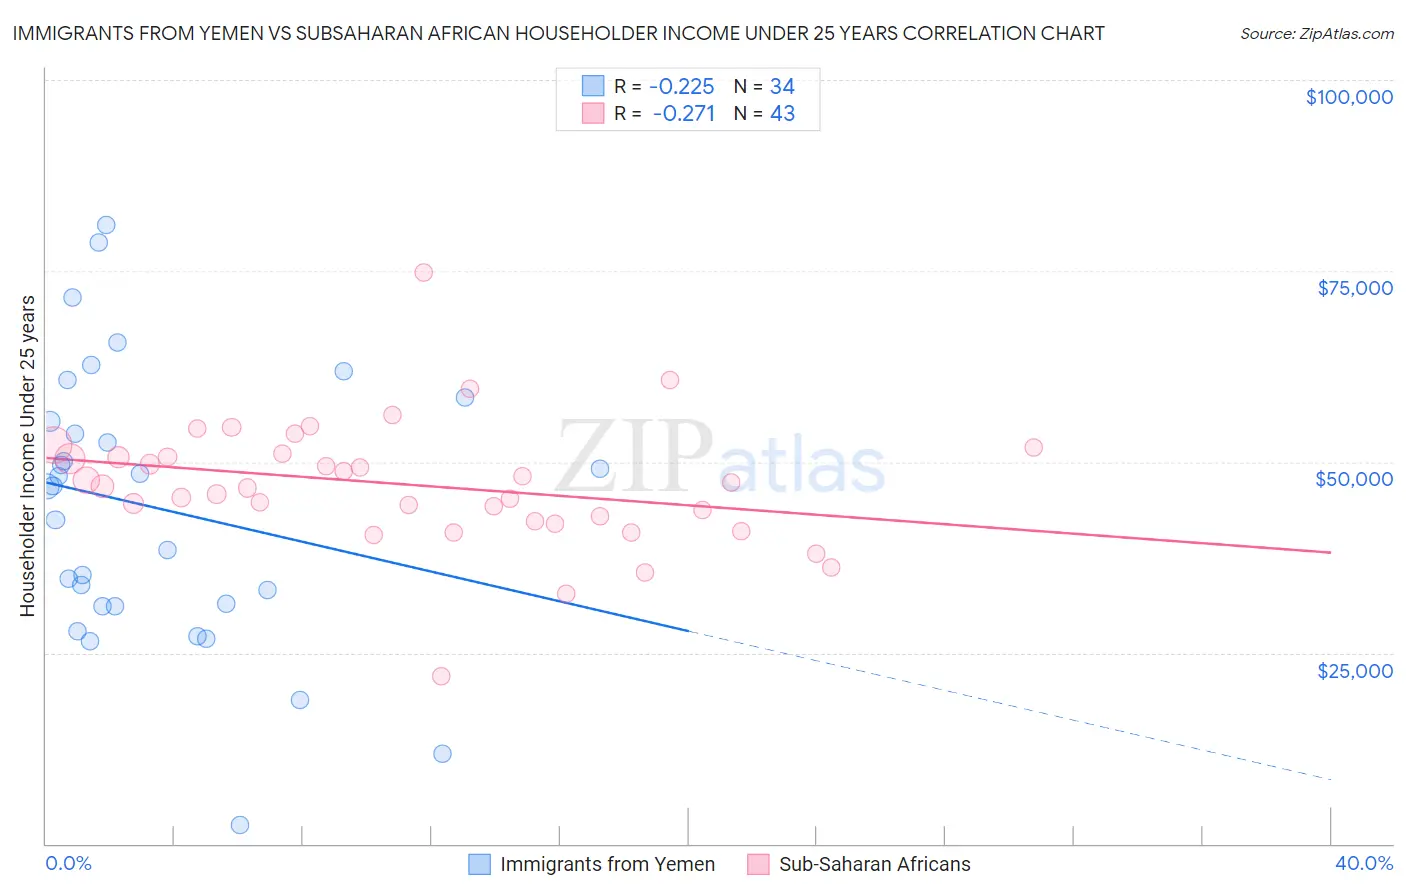 Immigrants from Yemen vs Subsaharan African Householder Income Under 25 years